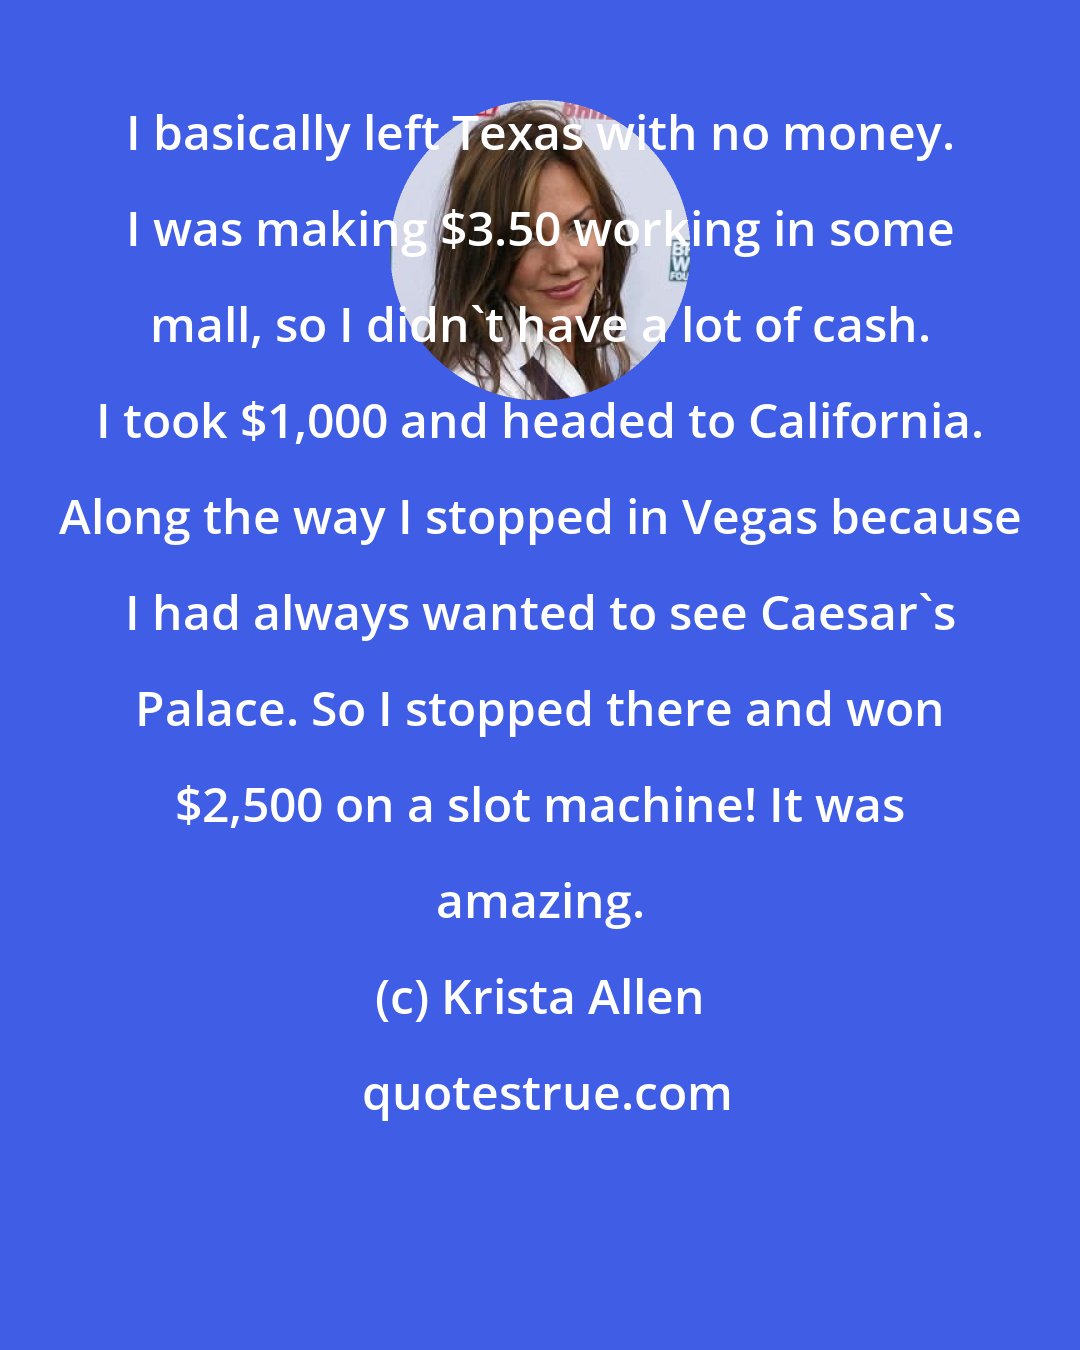 Krista Allen: I basically left Texas with no money. I was making $3.50 working in some mall, so I didn't have a lot of cash. I took $1,000 and headed to California. Along the way I stopped in Vegas because I had always wanted to see Caesar's Palace. So I stopped there and won $2,500 on a slot machine! It was amazing.